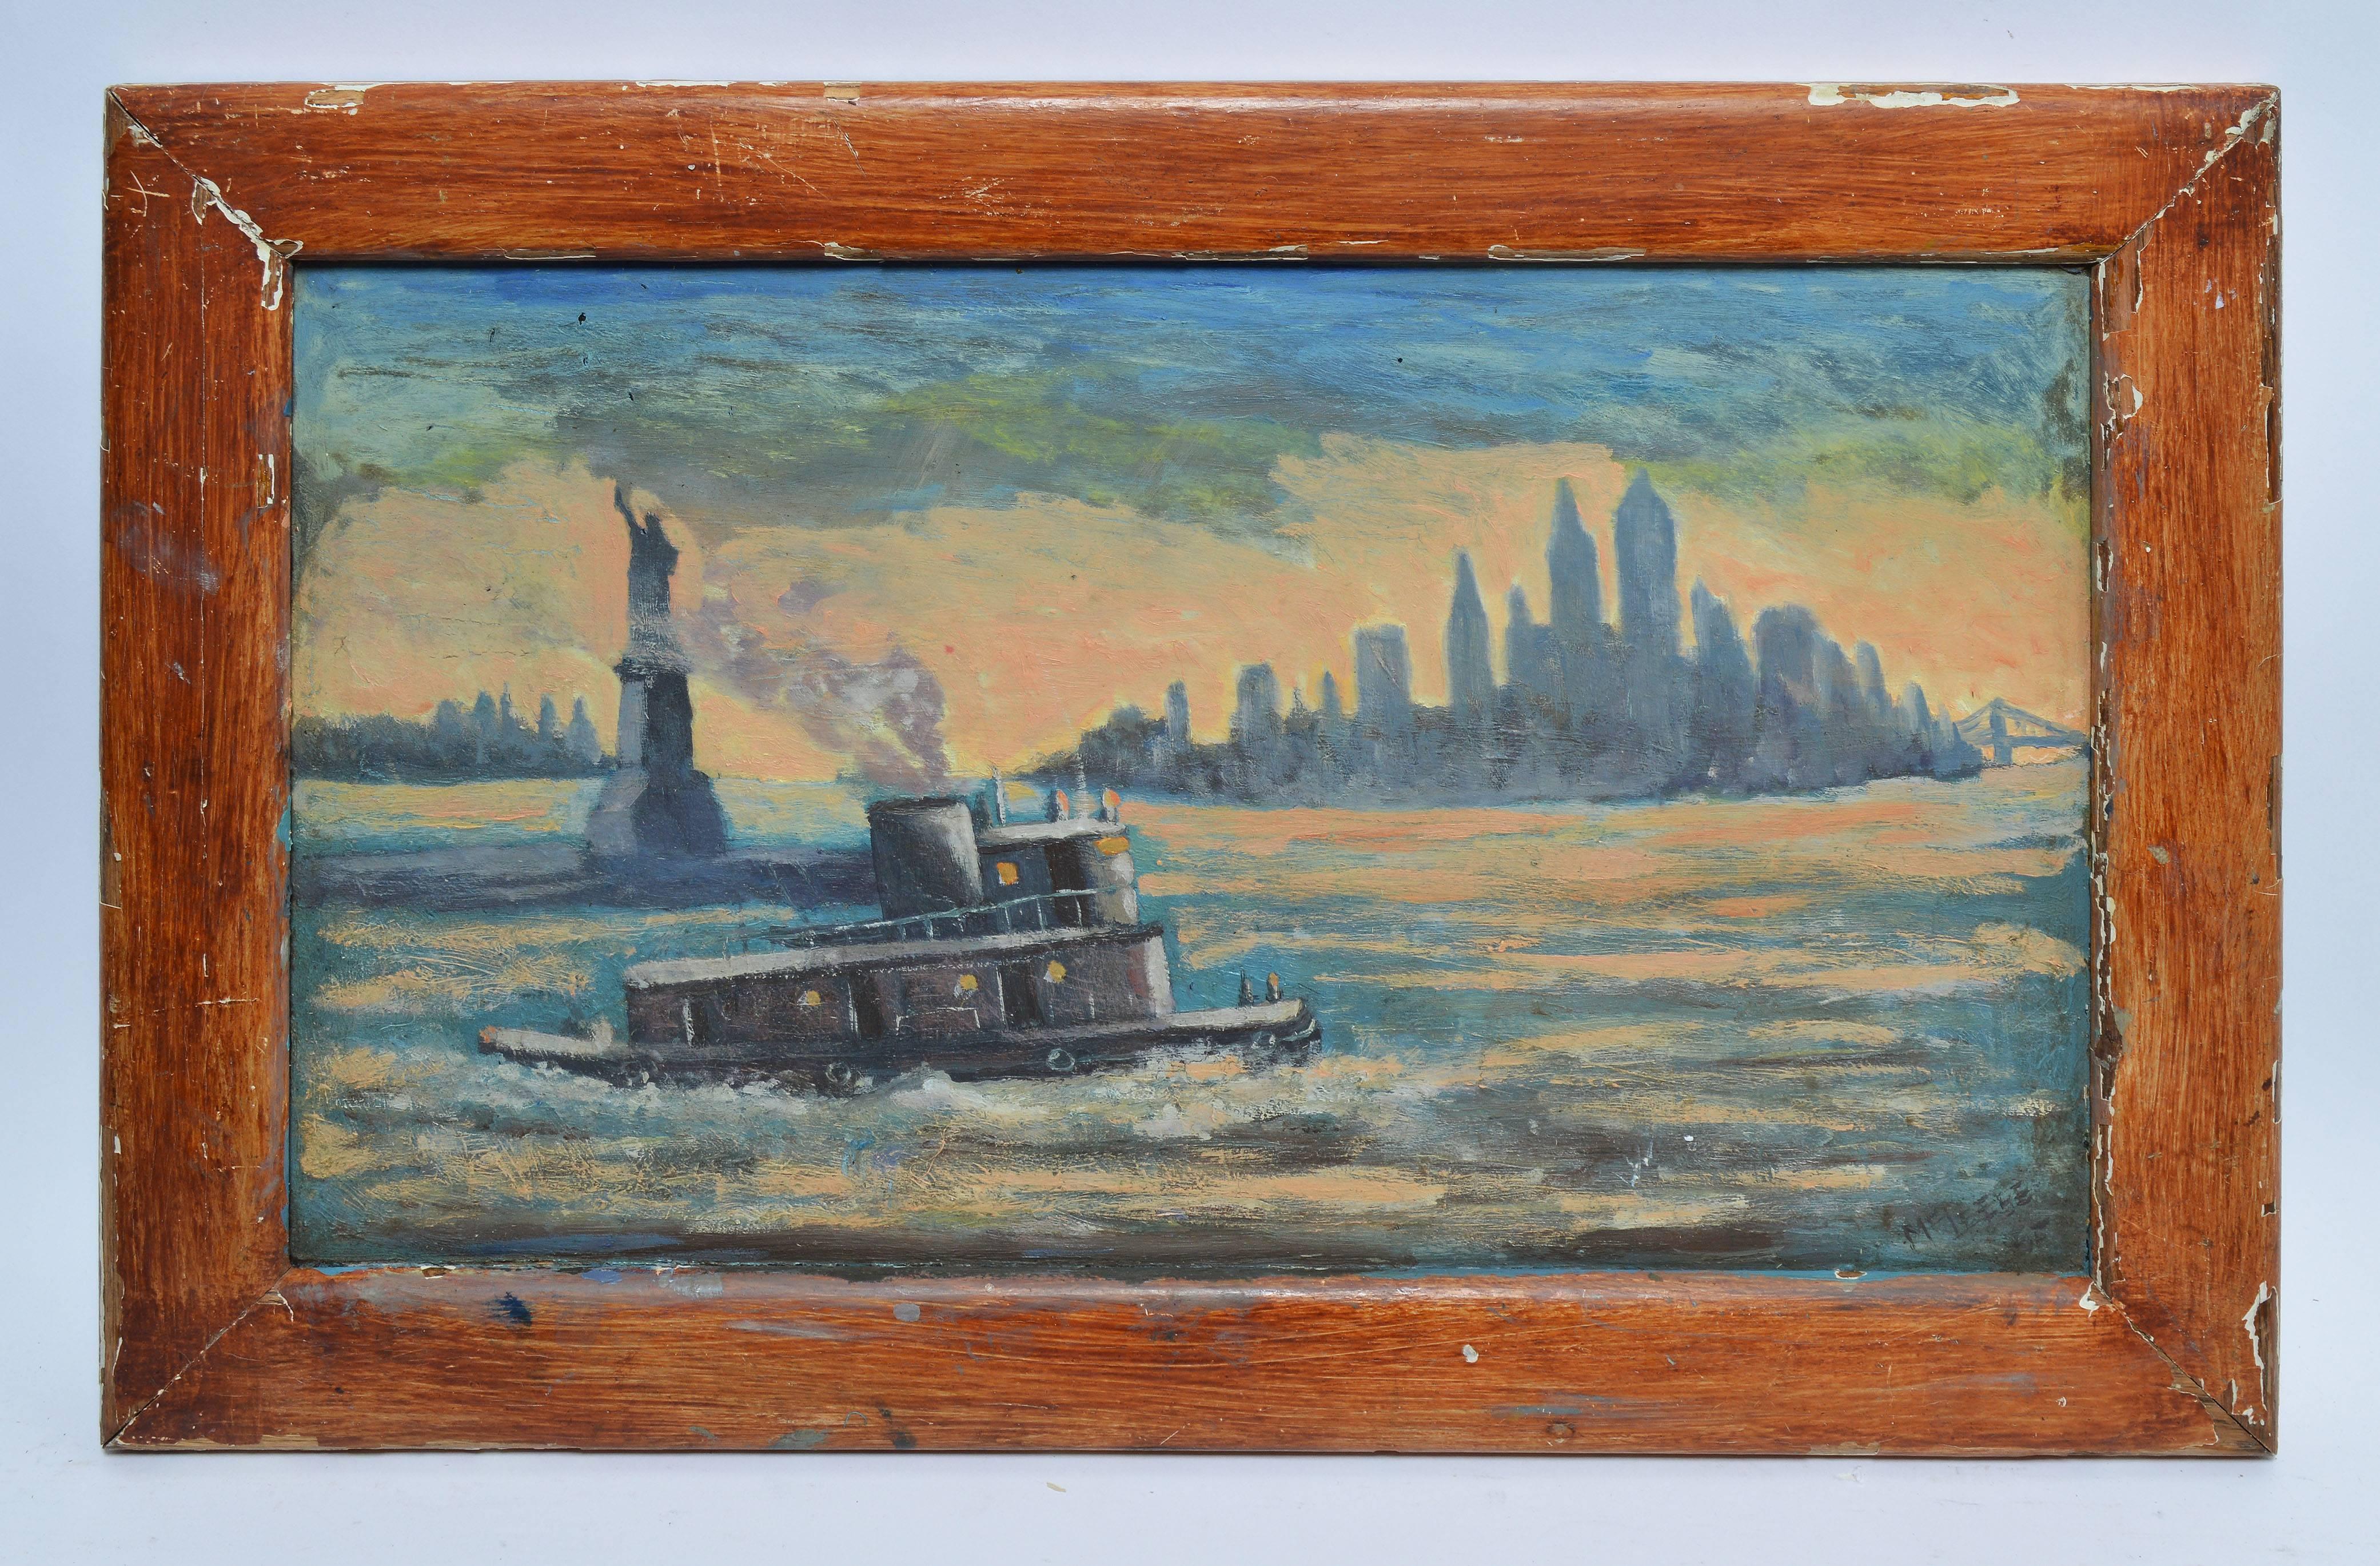 Sunset View of New York Harbor and the Statue of Liberty - Painting by Unknown